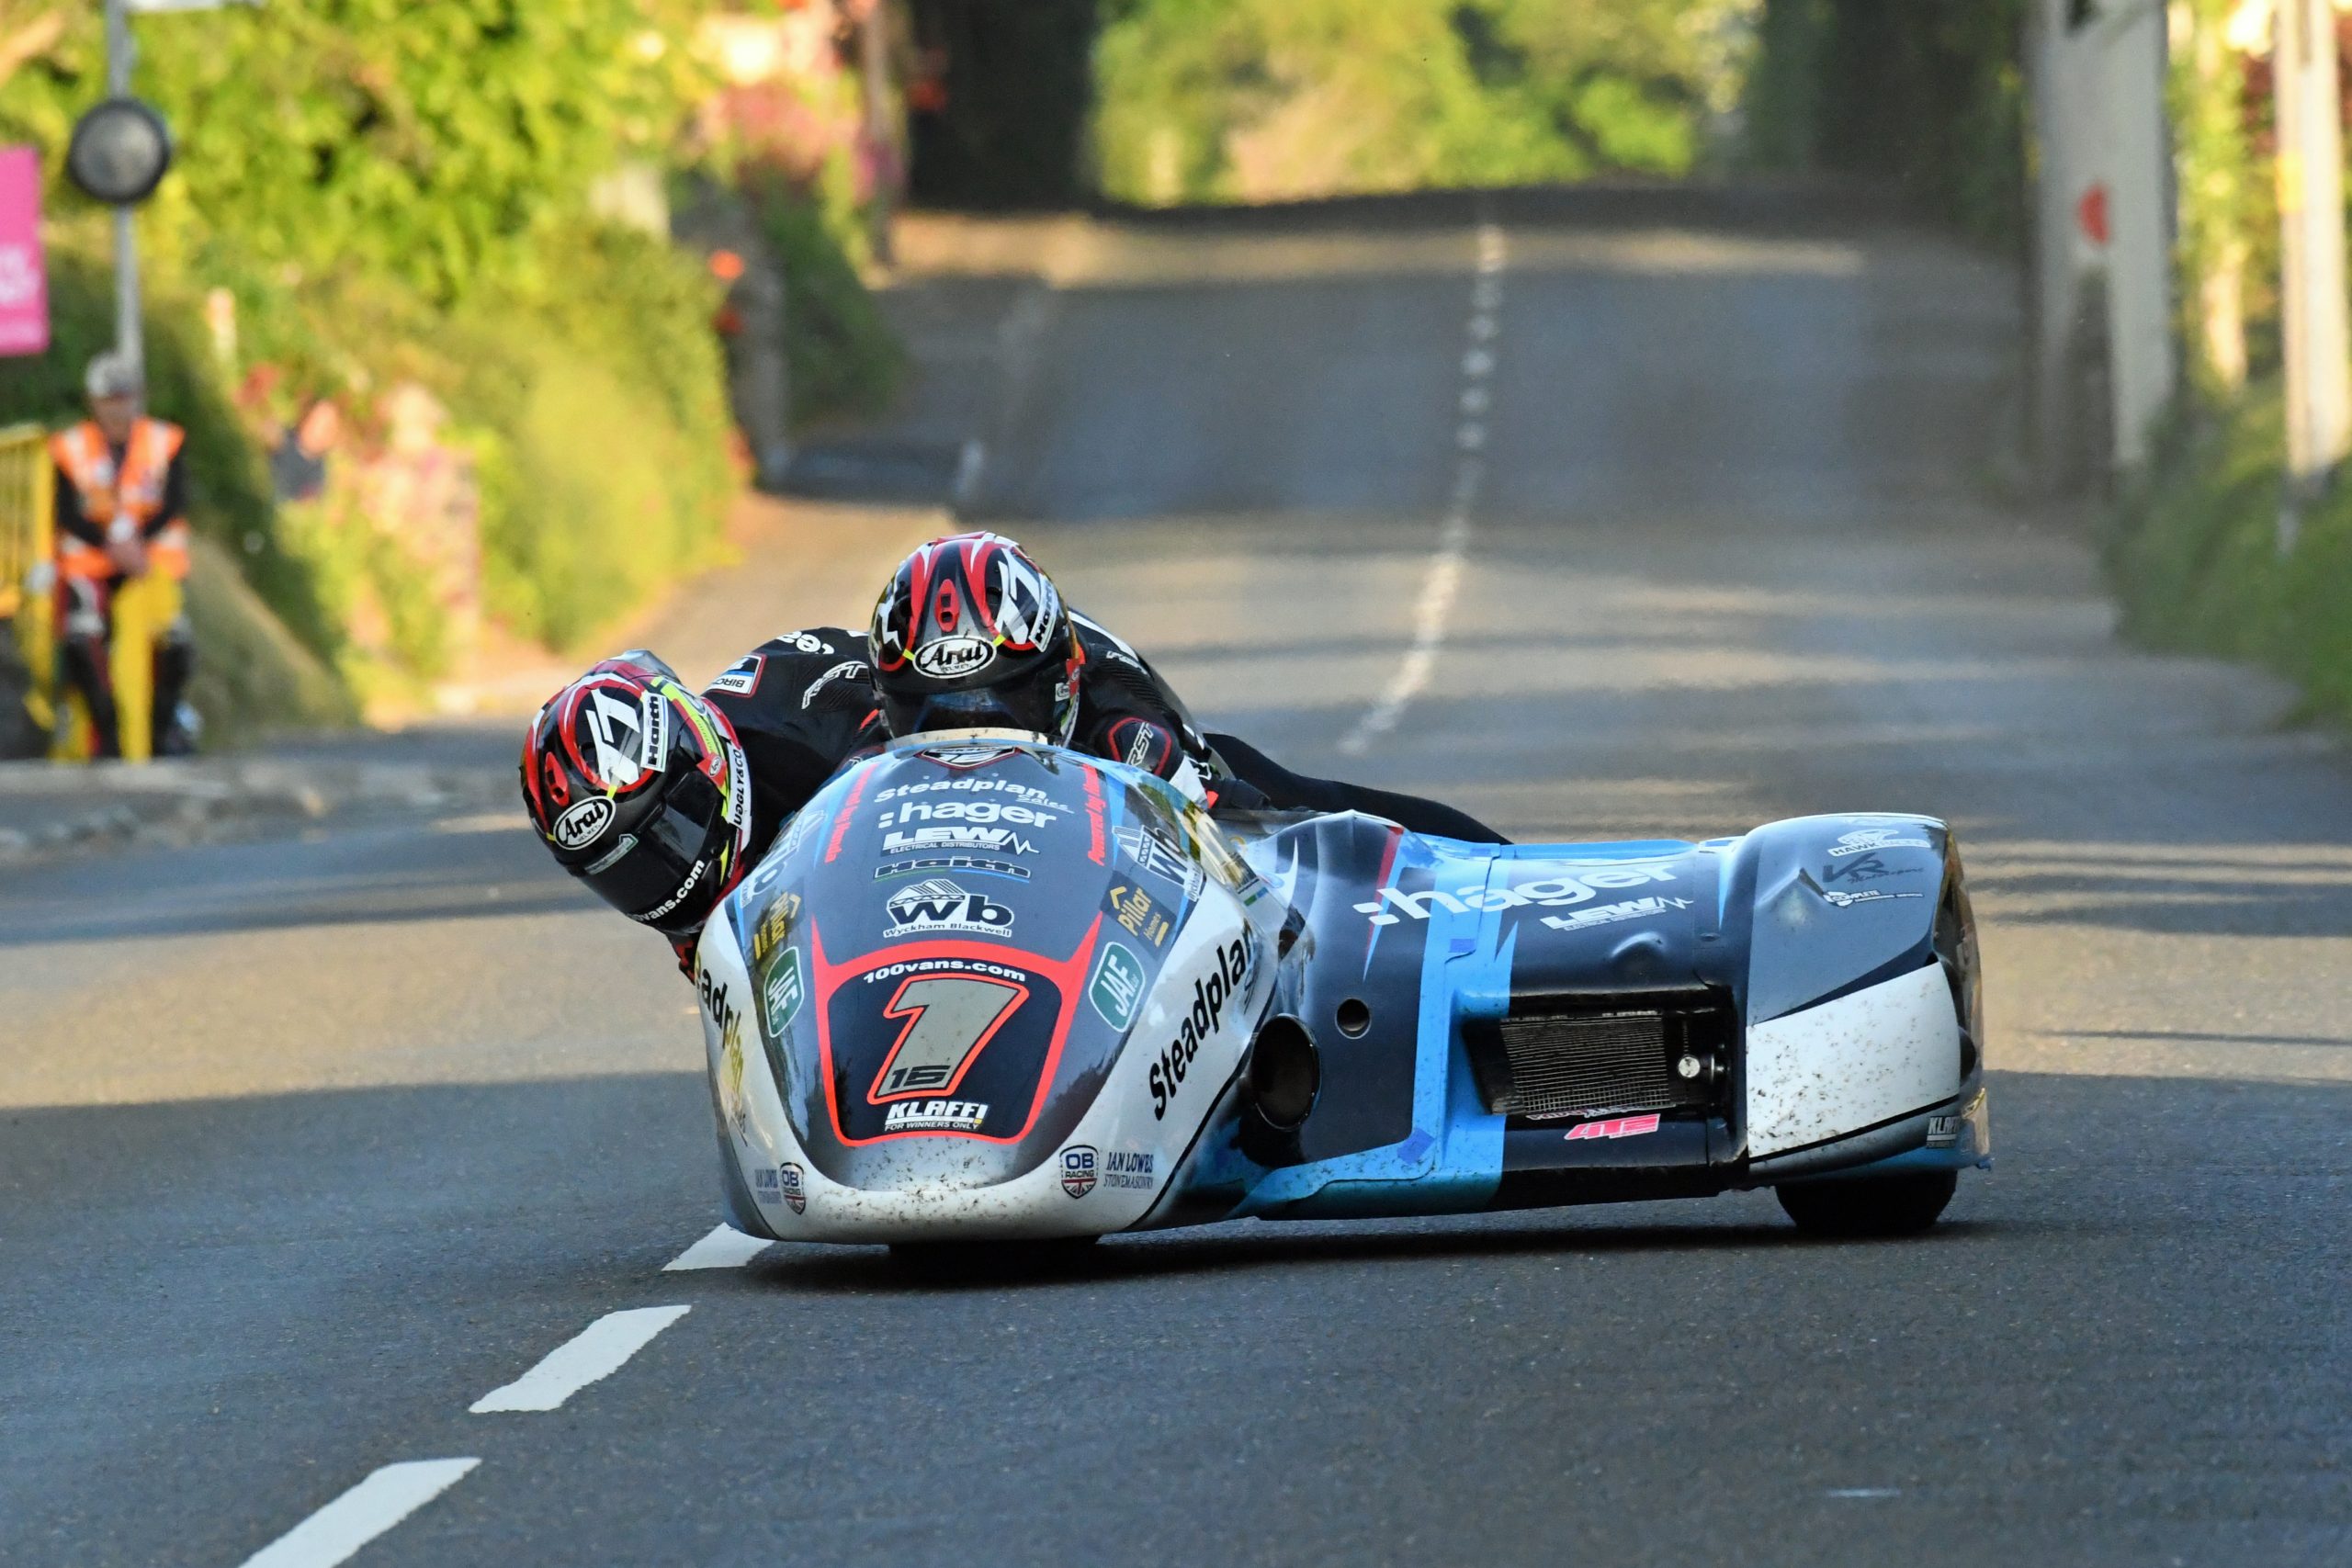 Hickman And Birchall Brothers The Pacesetters At Tt 2023.